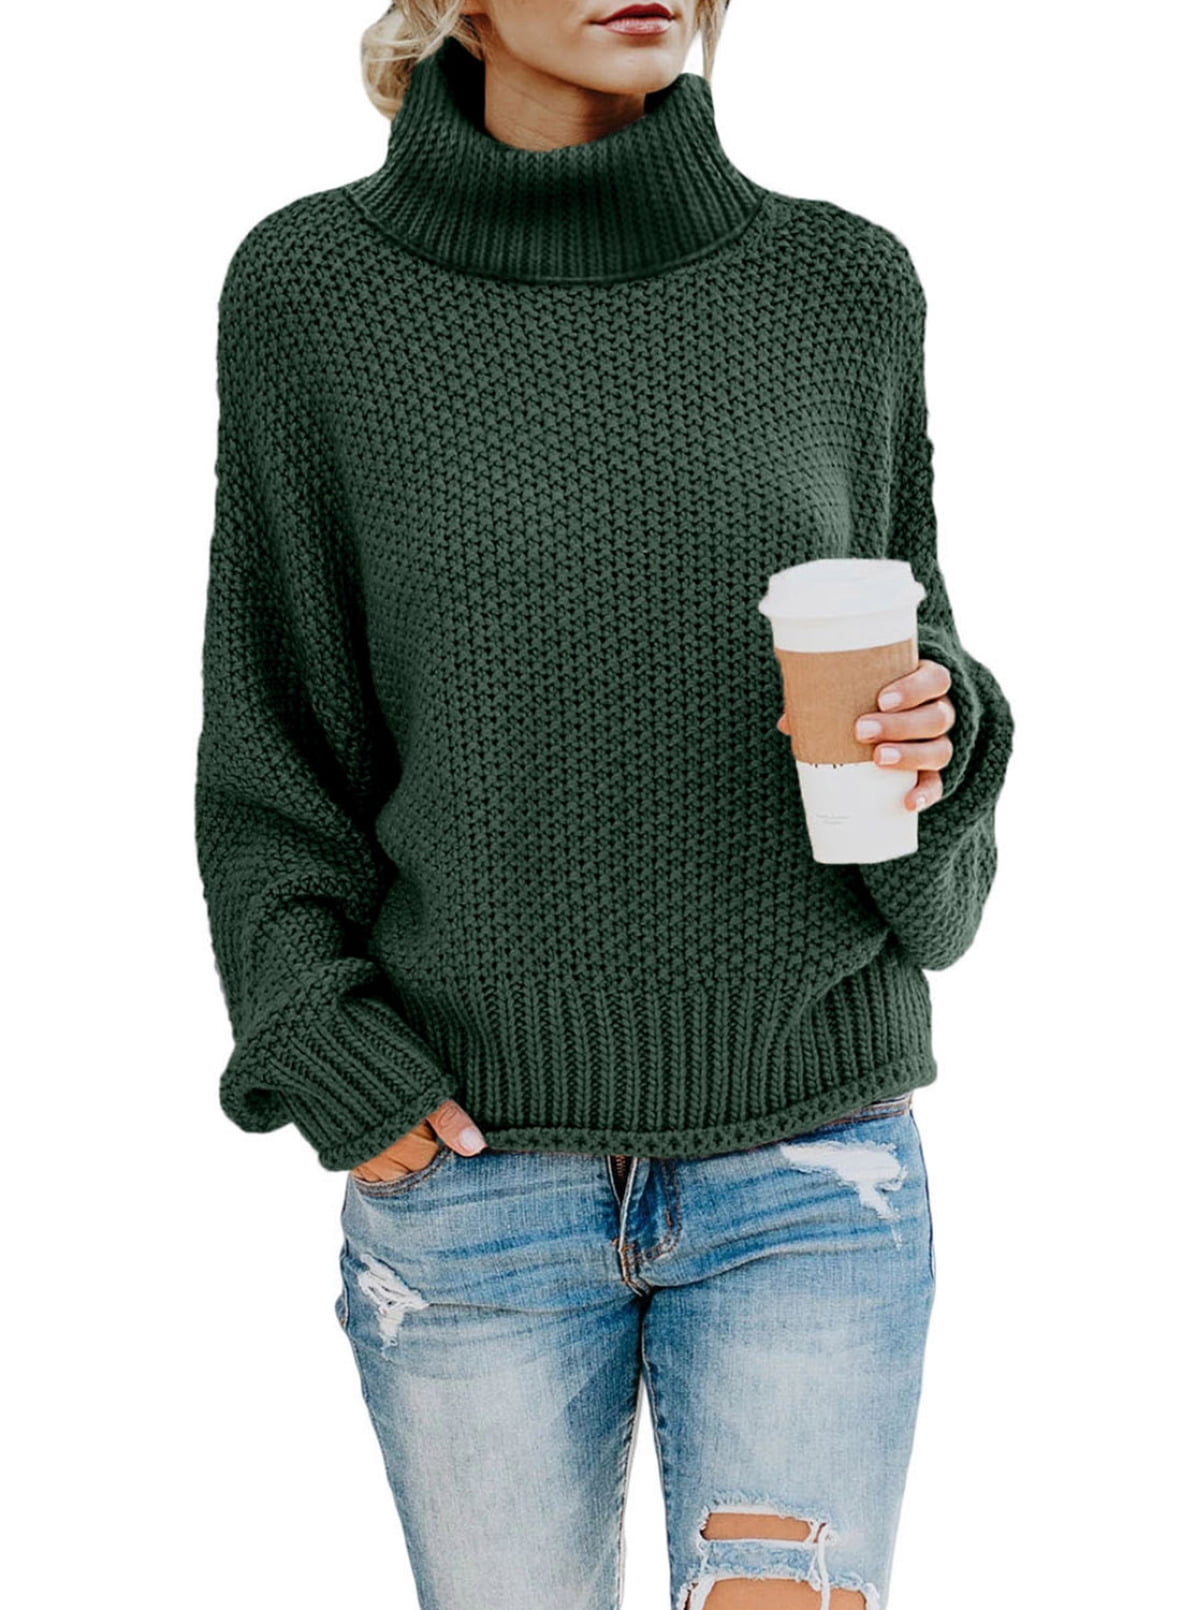 Sidefeel Women High Collar Cable Knit Sweater Winter Warm Turtleneck ...